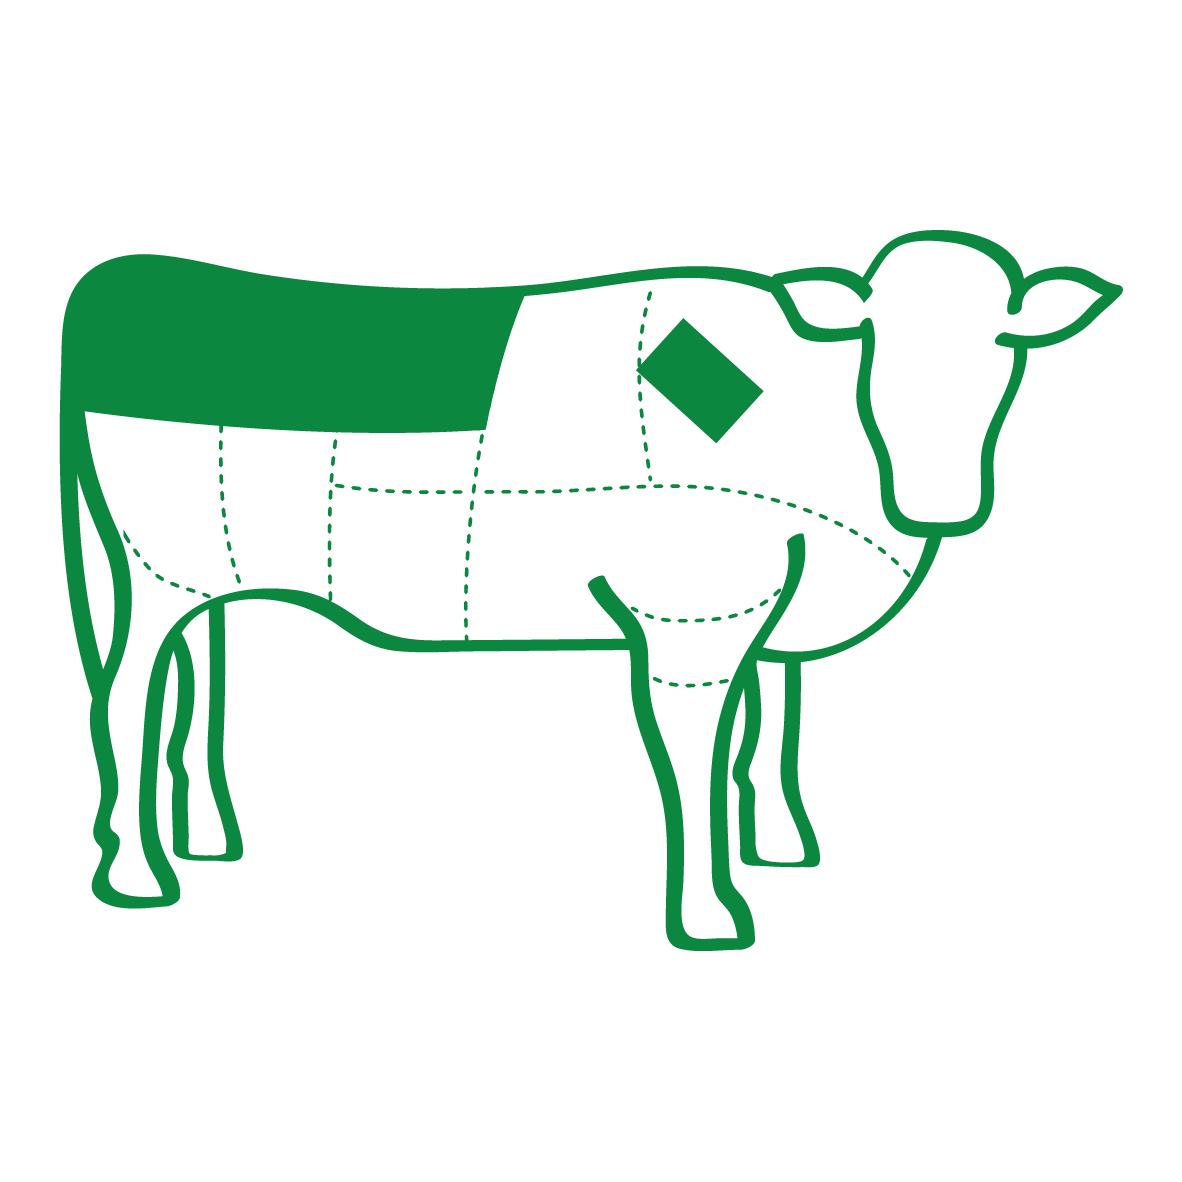 an illustration of a beef carcass showing where stir-fry come from